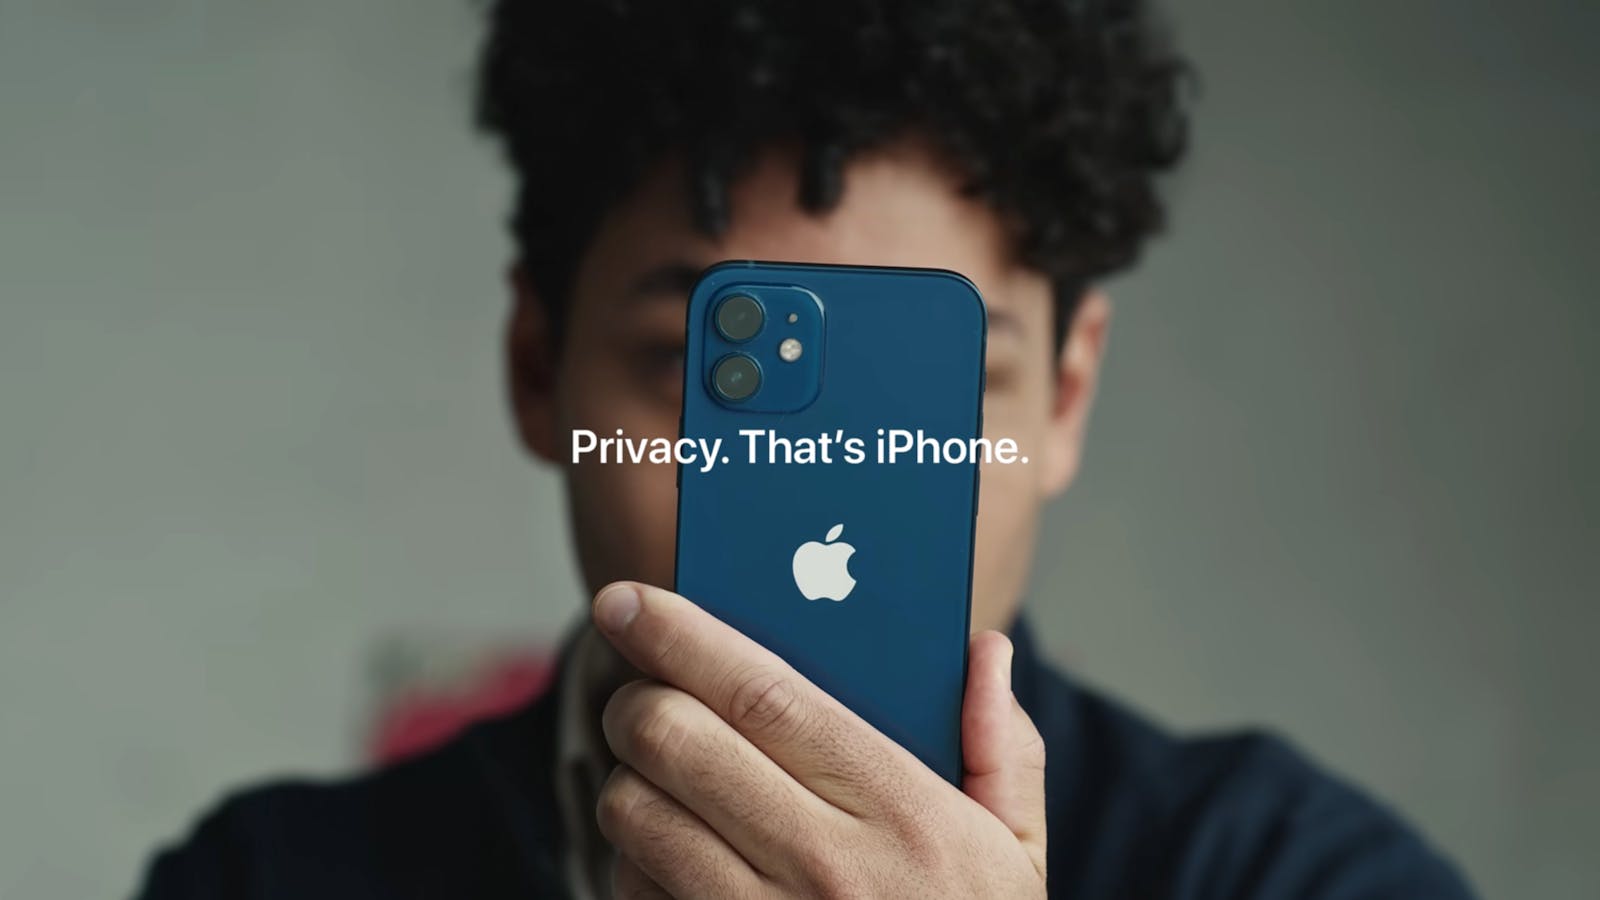 Apple ad announcing new privacy options for blocking mobile ad tracking.